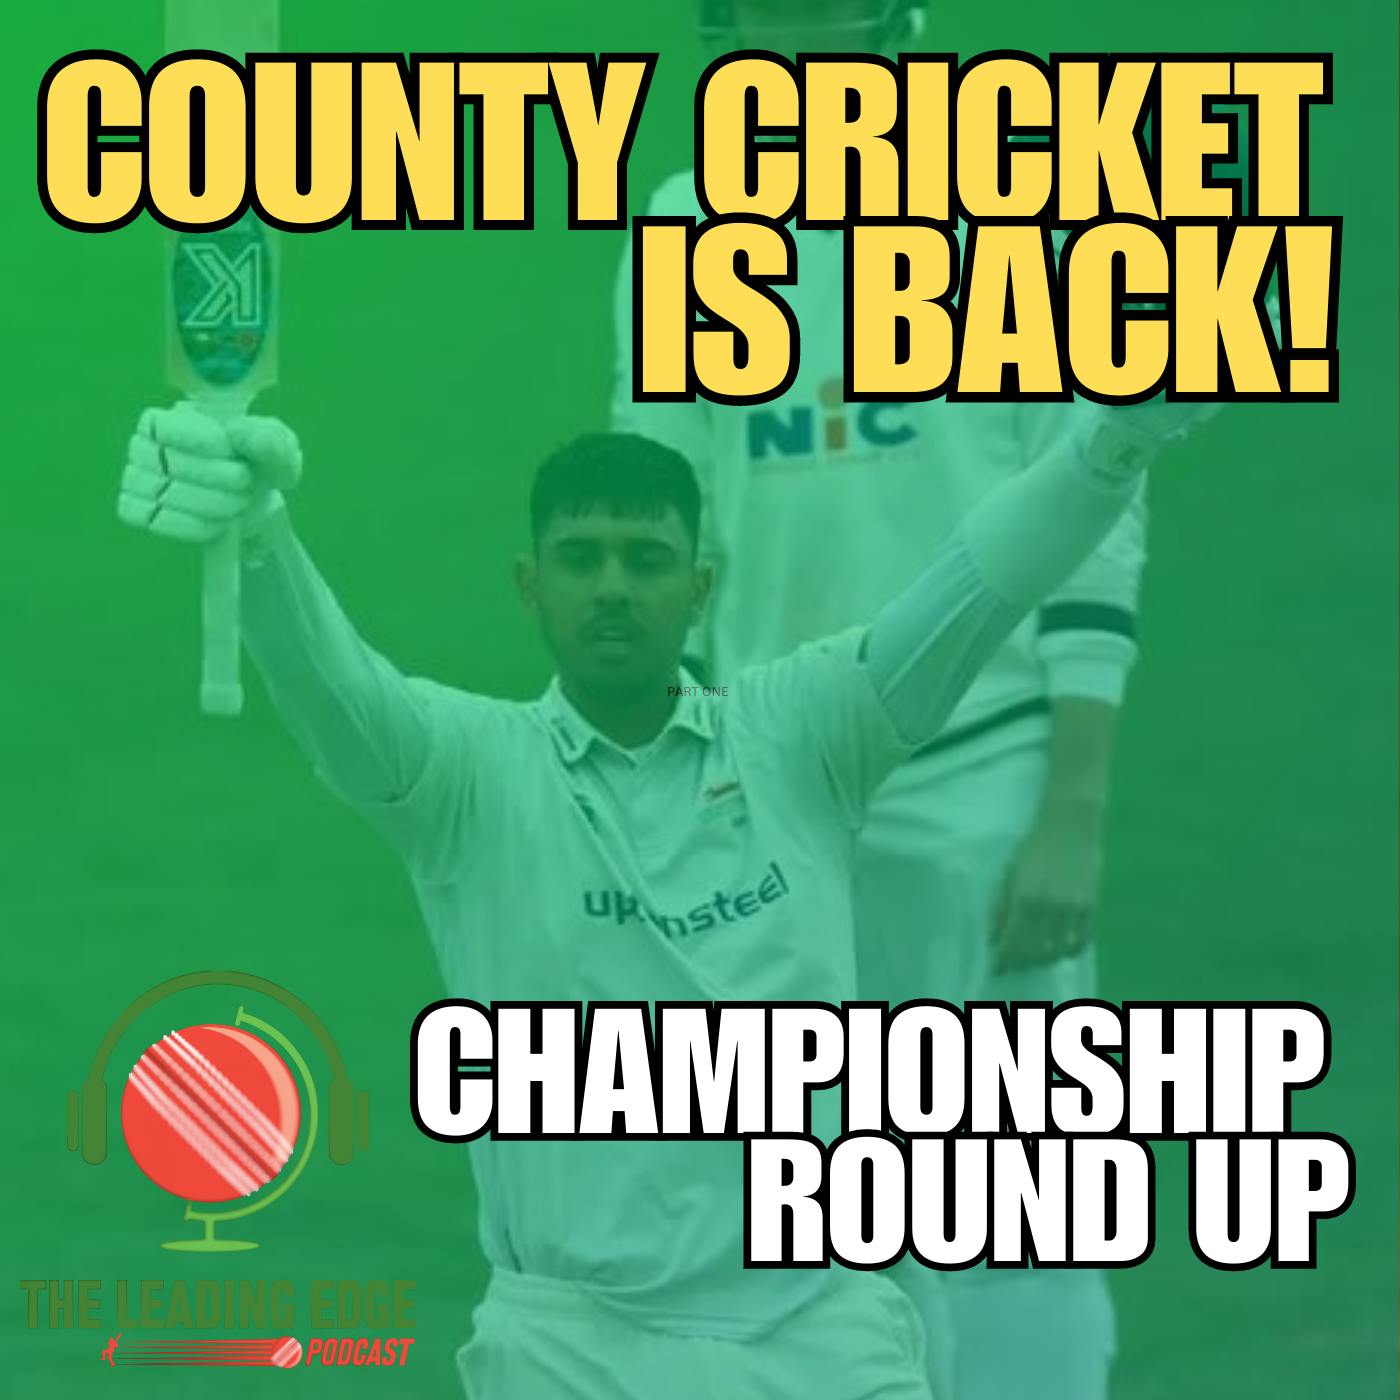 County Championship Round 1 Review